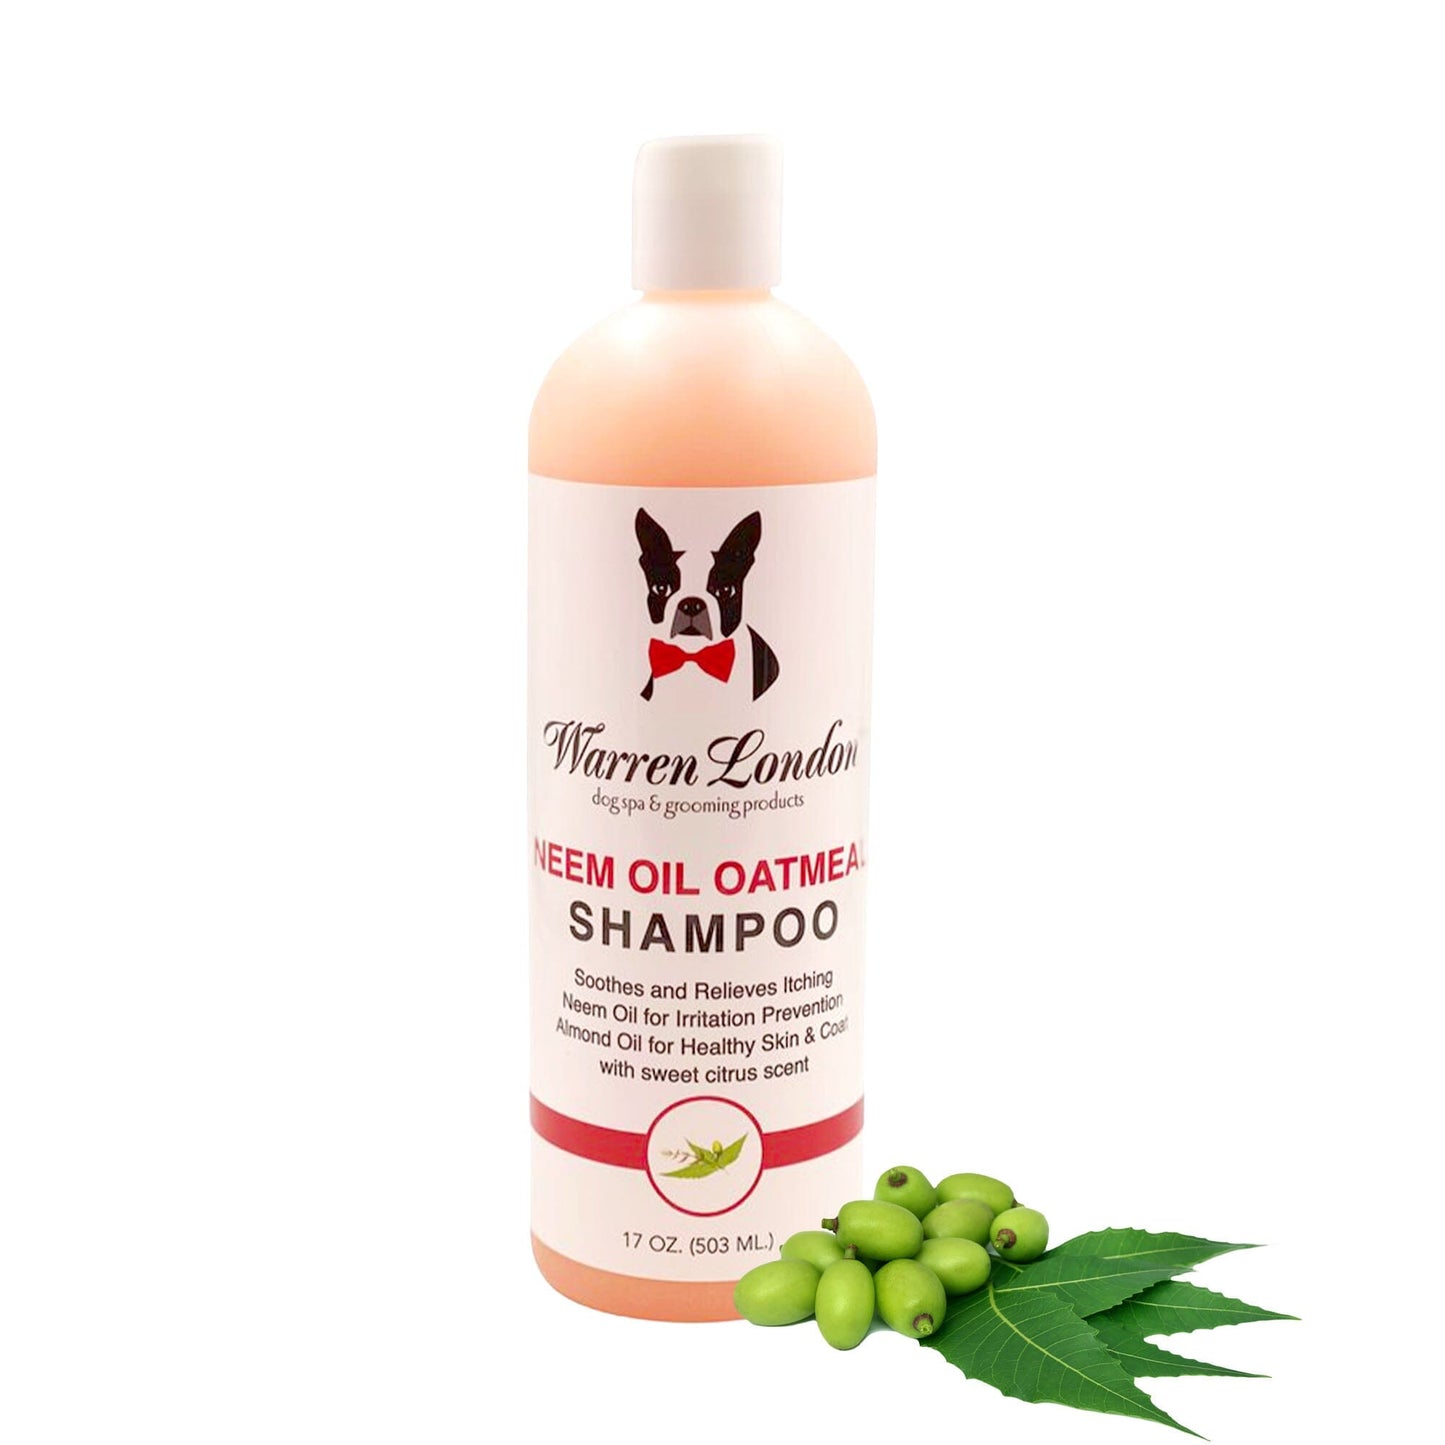 Neem Oil Oatmeal Shampoo - Soothes and Prevents Itching - Professional Size Grooming Size Product Warren London 